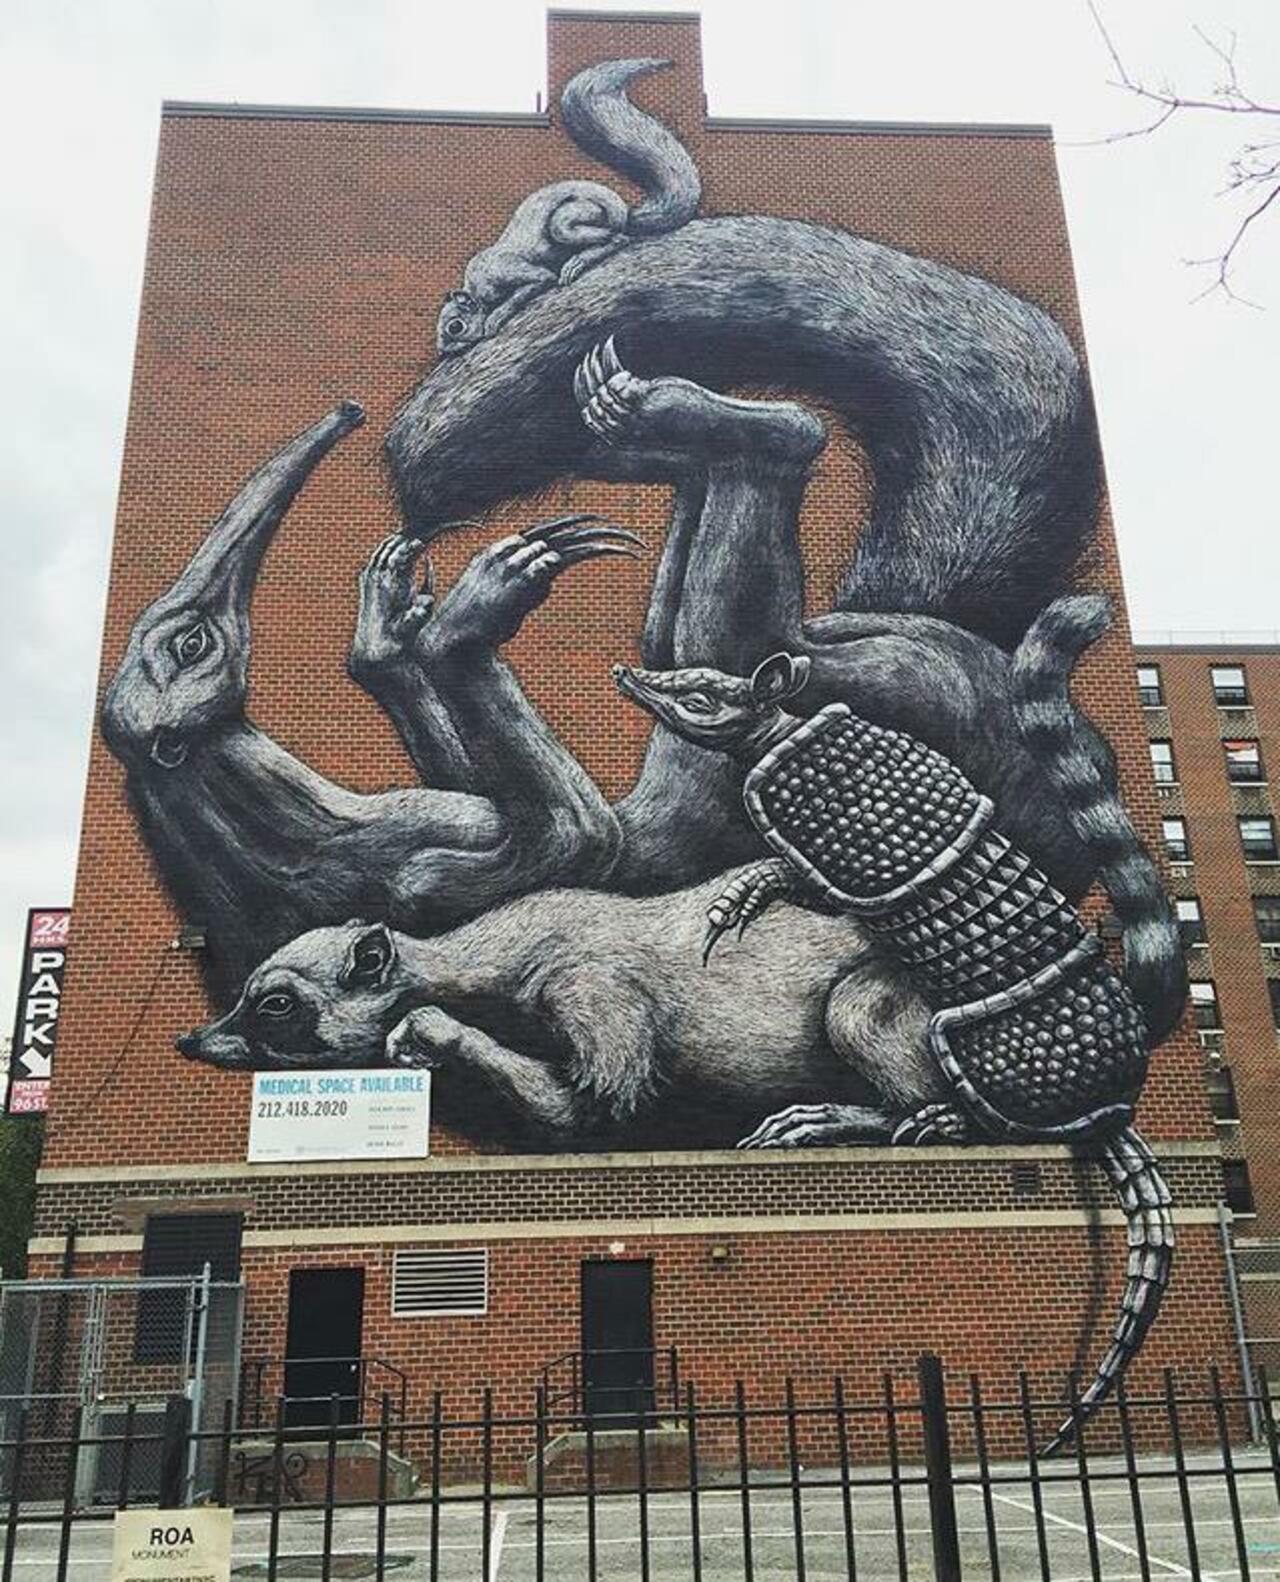 The completed new large scale Street Art wall by ROA in NYC

#art #graffiti #mural #streetart http://t.co/NGQwvYw0or